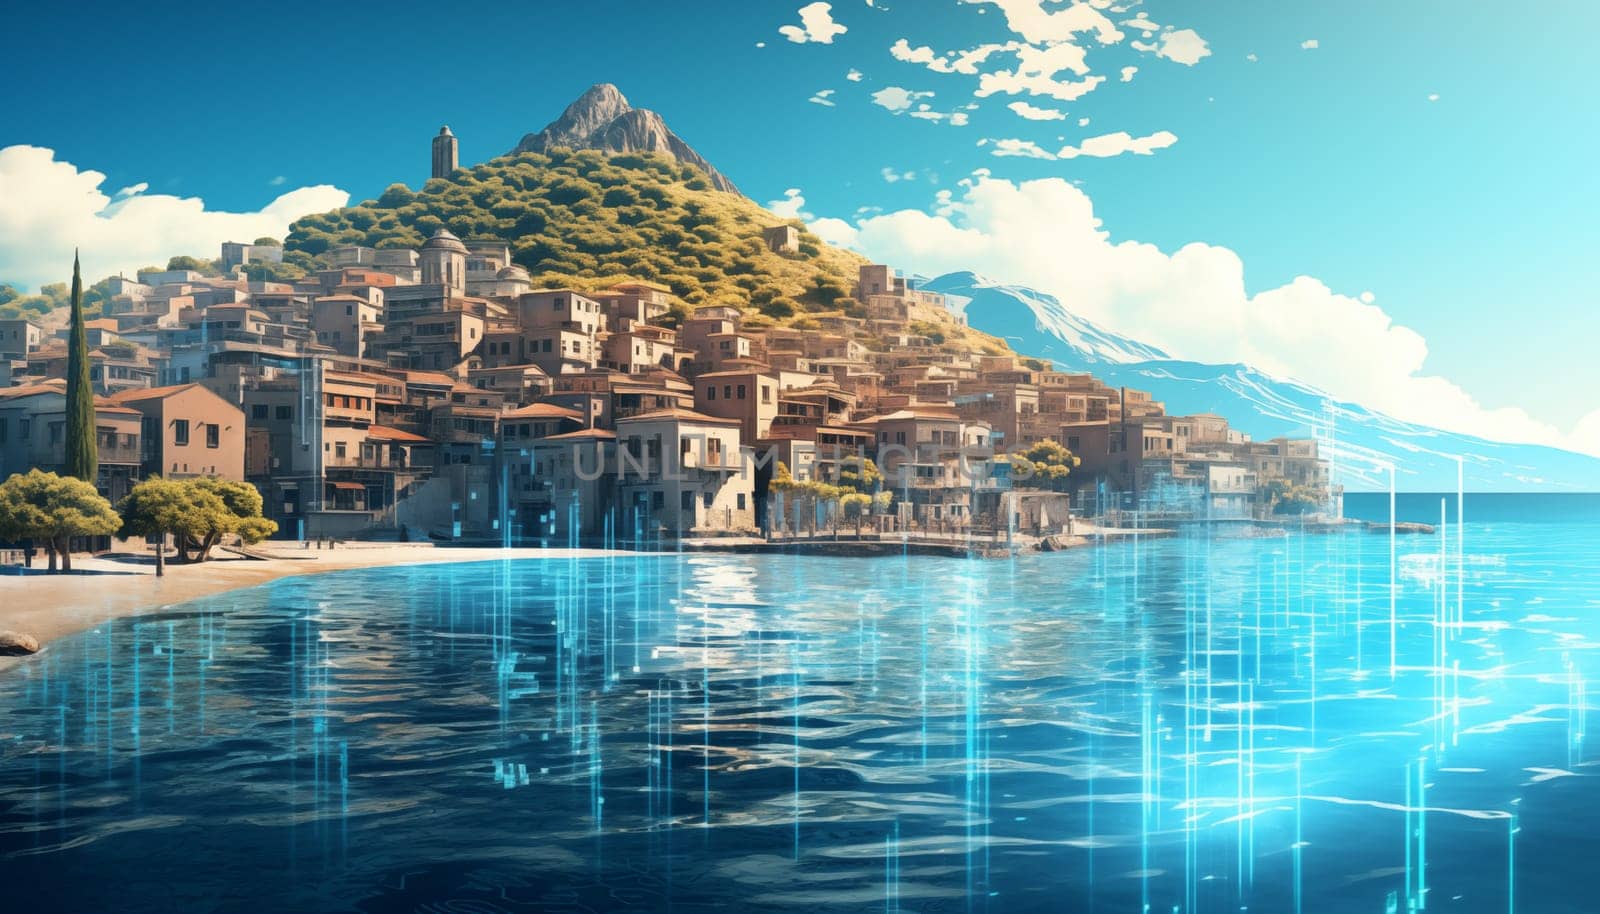 Immerse yourself in a stunning digital painting capturing the harmonious blend of a bustling cityscape and a serene beachfront. Marvel at the vibrant colors and intricate details as an artificial intelligence becomes your travel guide to this extraordinary world.